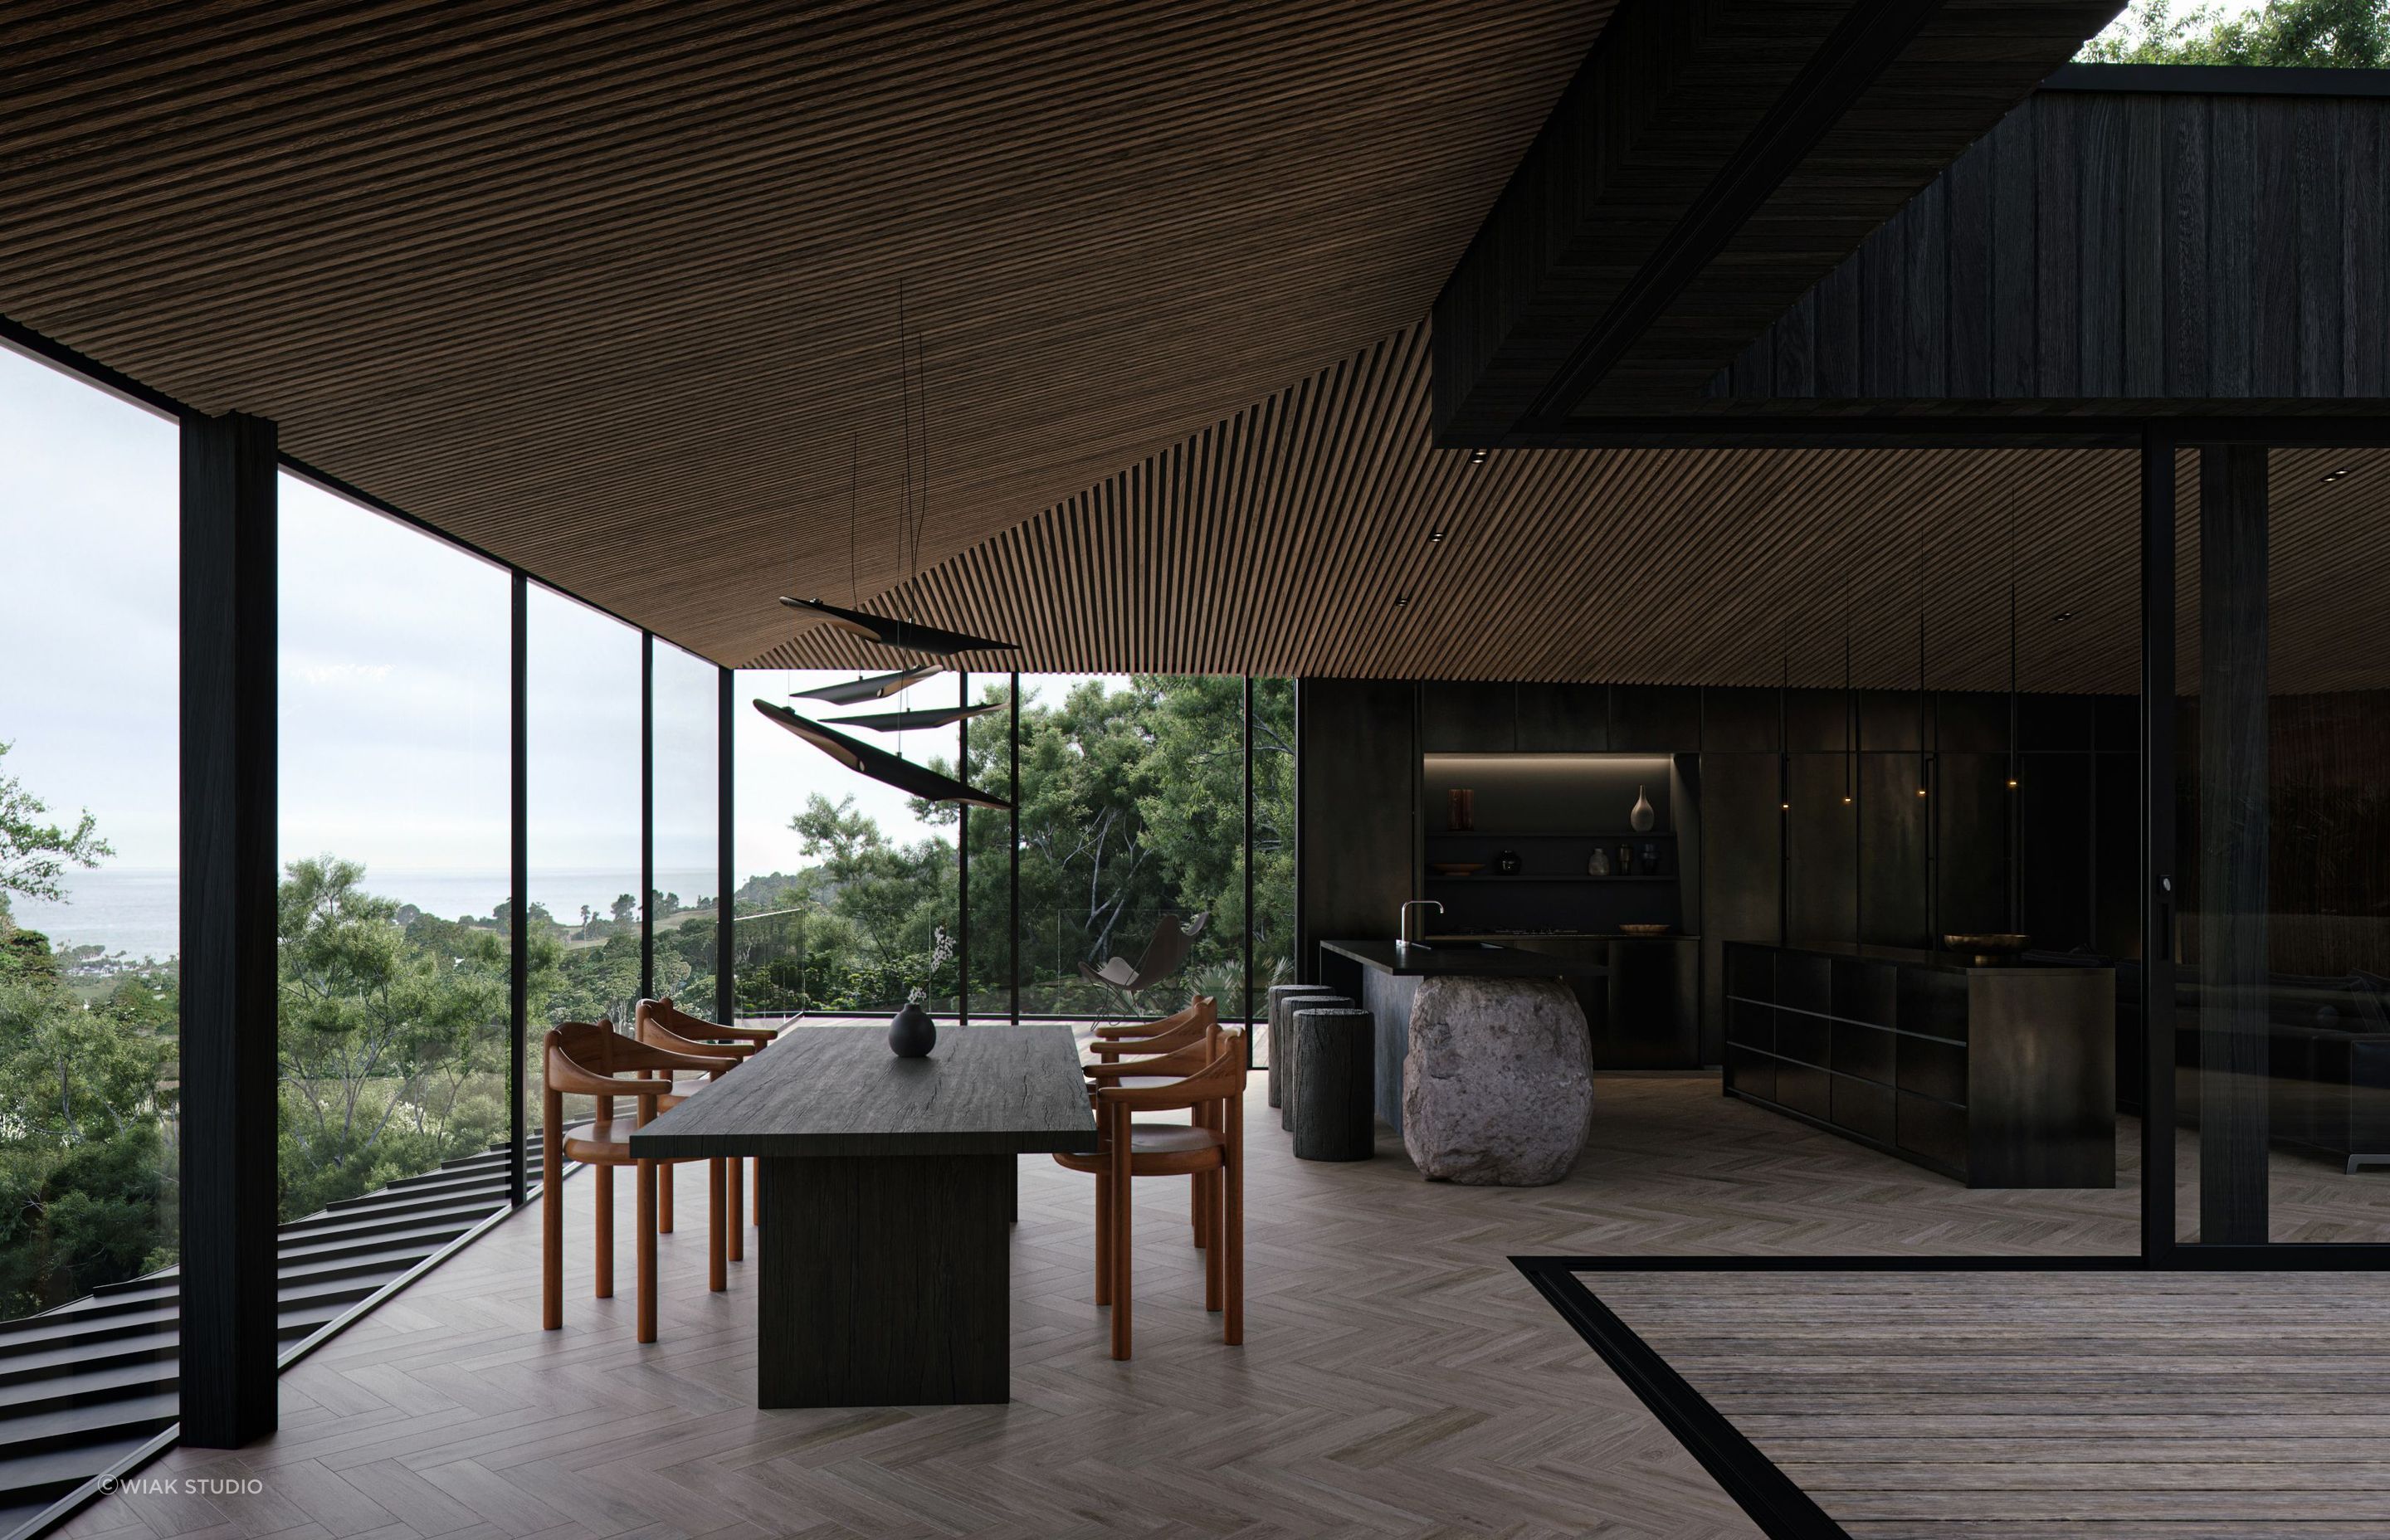 The floor-to-ceiling windows open the home up to the native bush surroundings and the Hauraki Gulf.